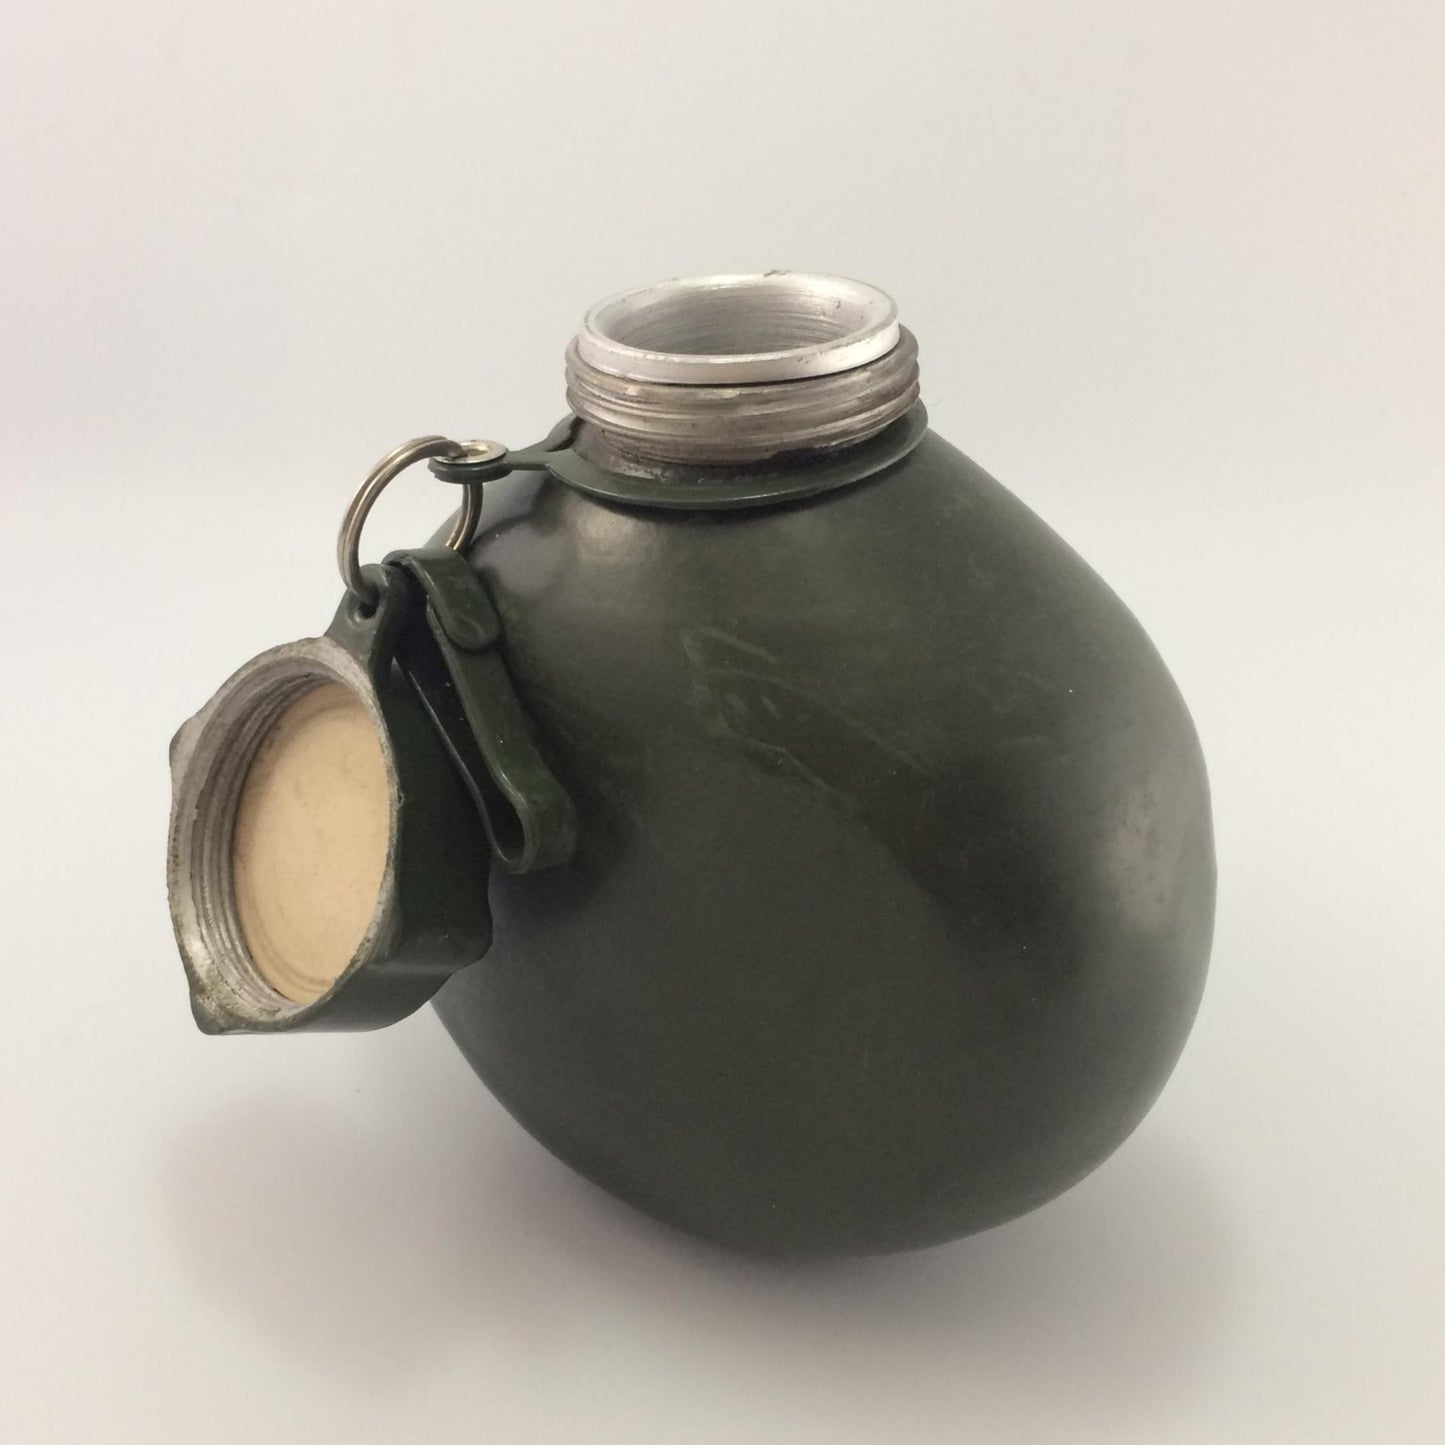 Hungarian People's Army HPA OG Green 950ml M70 "ALI" Water Canteen